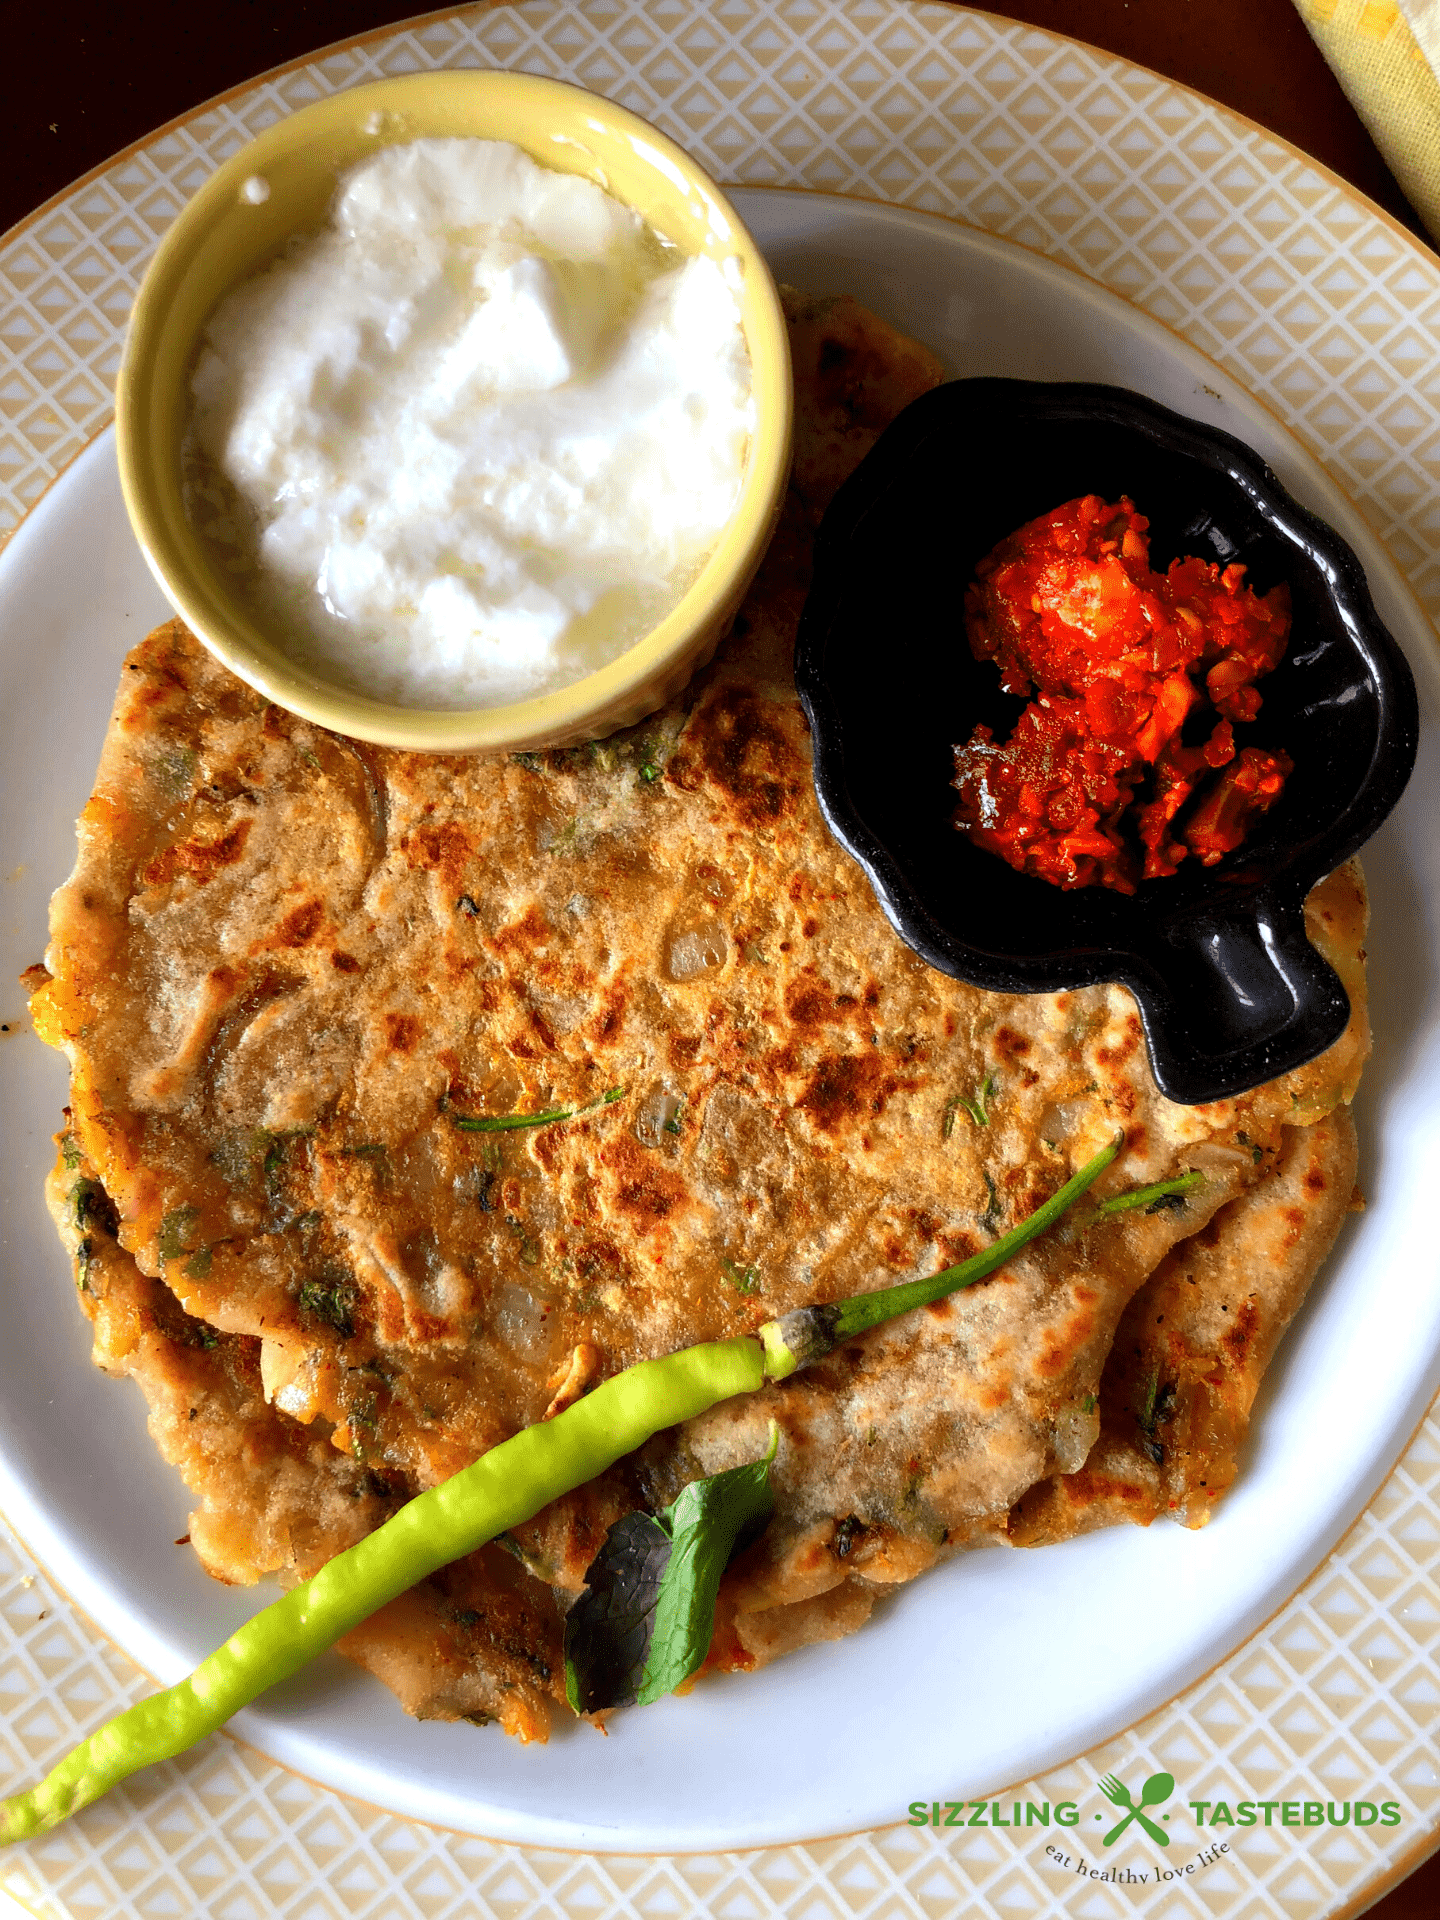 Masala Alu Paratha is a delicious and filling Spiced Potato flatbread, shallow fried in a pan., Served with Yogurt / pickle for breakfast, lunch or dinner